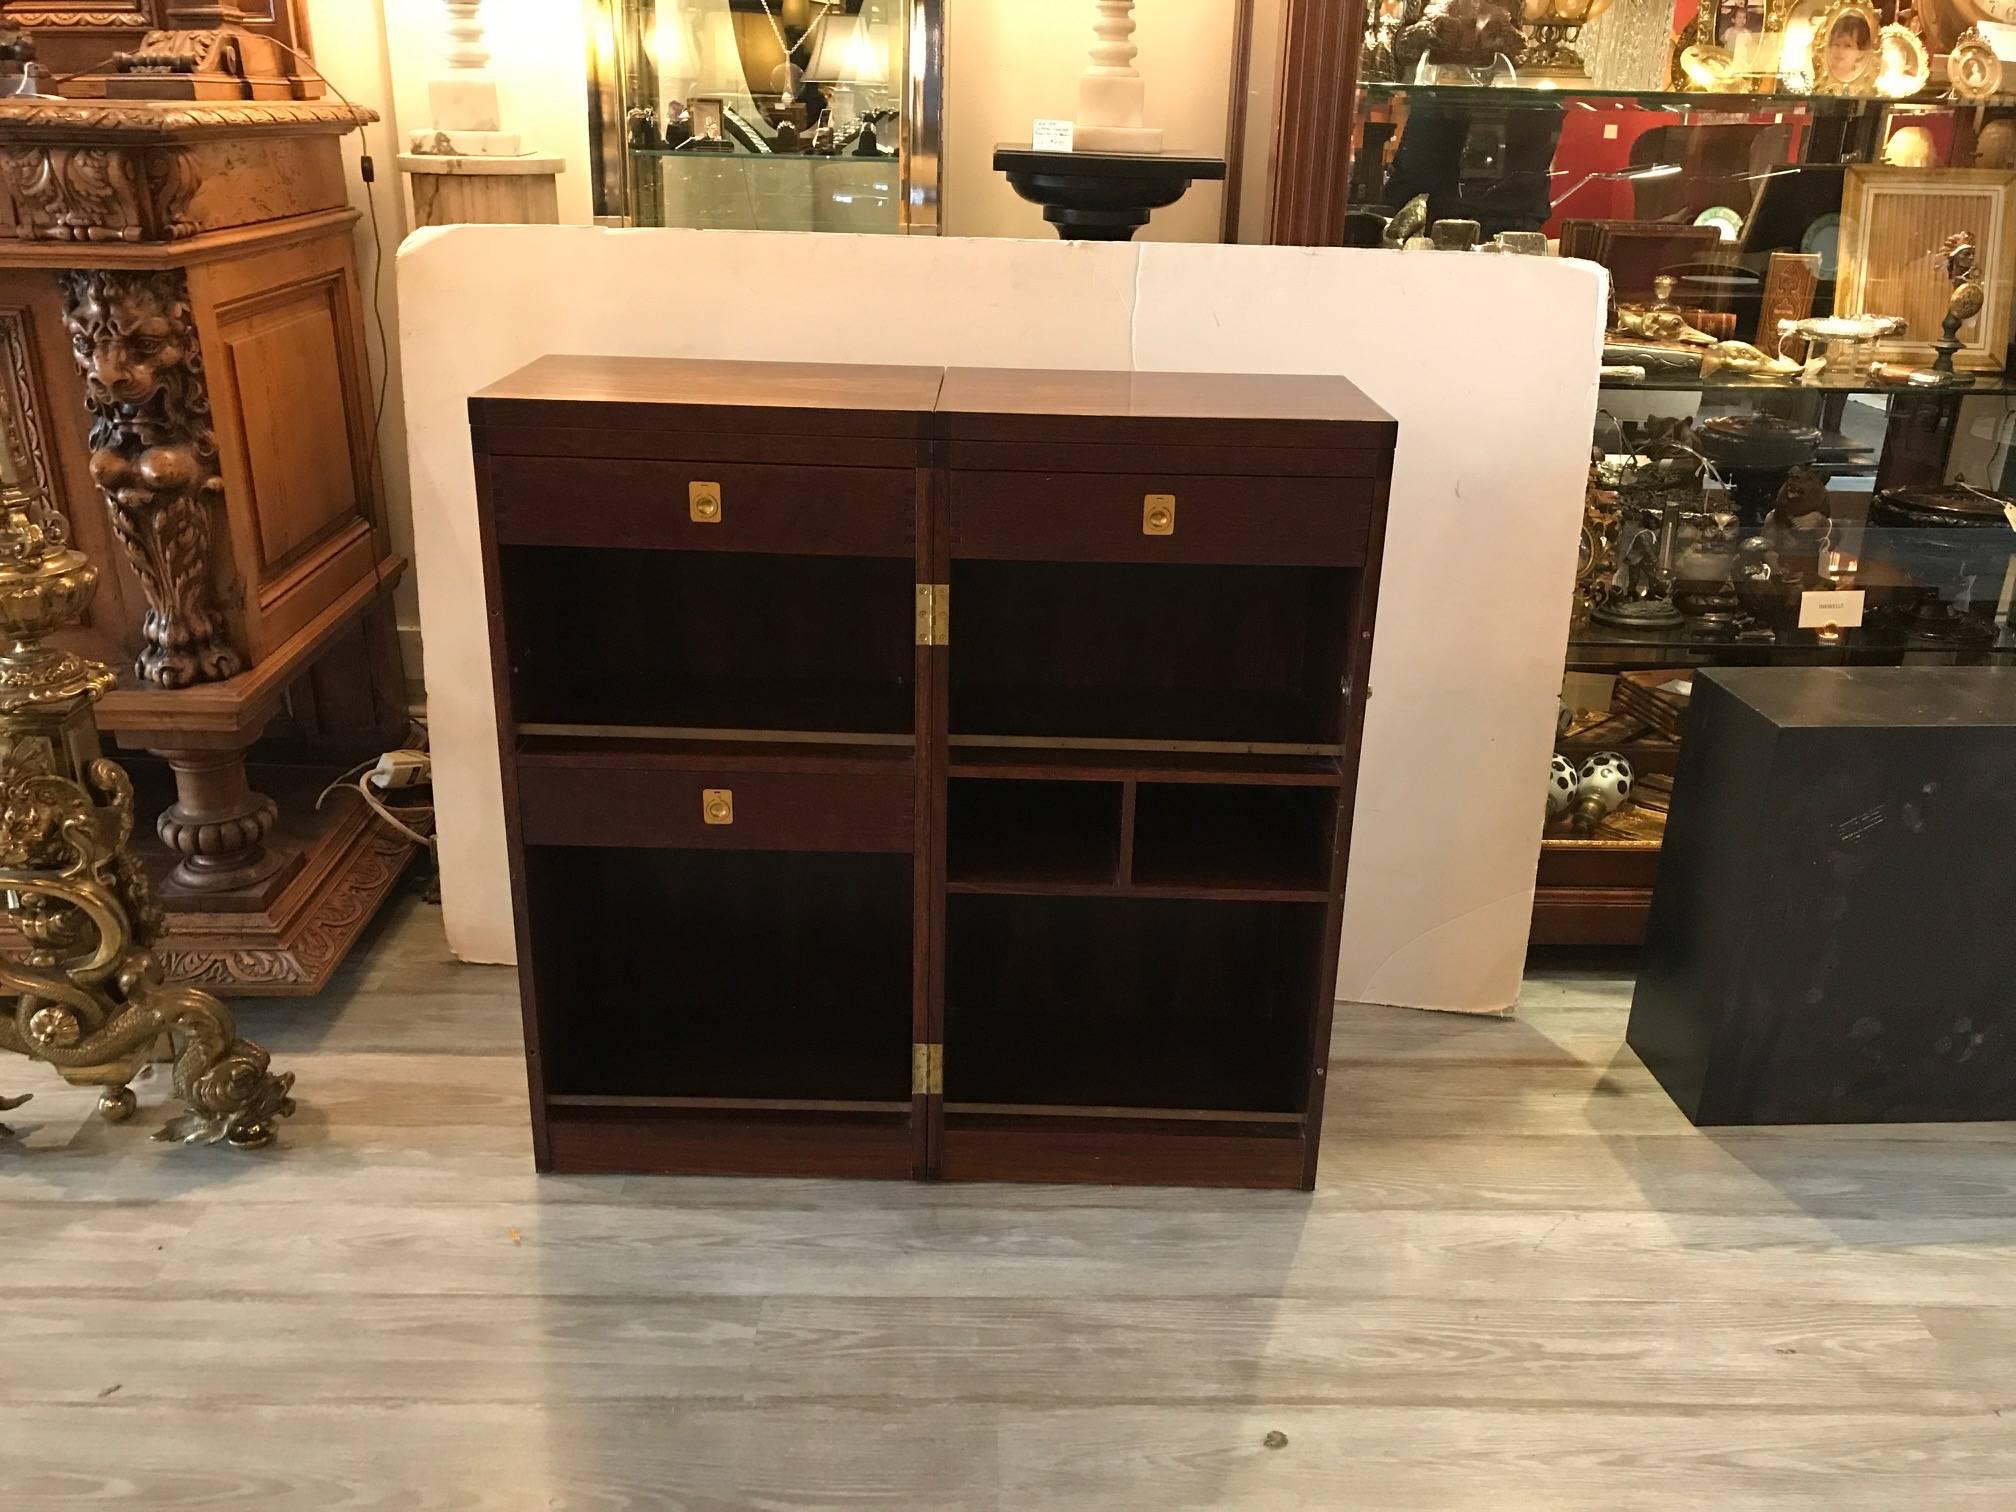 High style Danish rosewood bar cabinet by Dyrlund. The exceptional bar when closed is trim and tailored and opens up to reveal a functional bar with upper top that flips open. The interior is fitted with drawers and shelves. It is marked on the